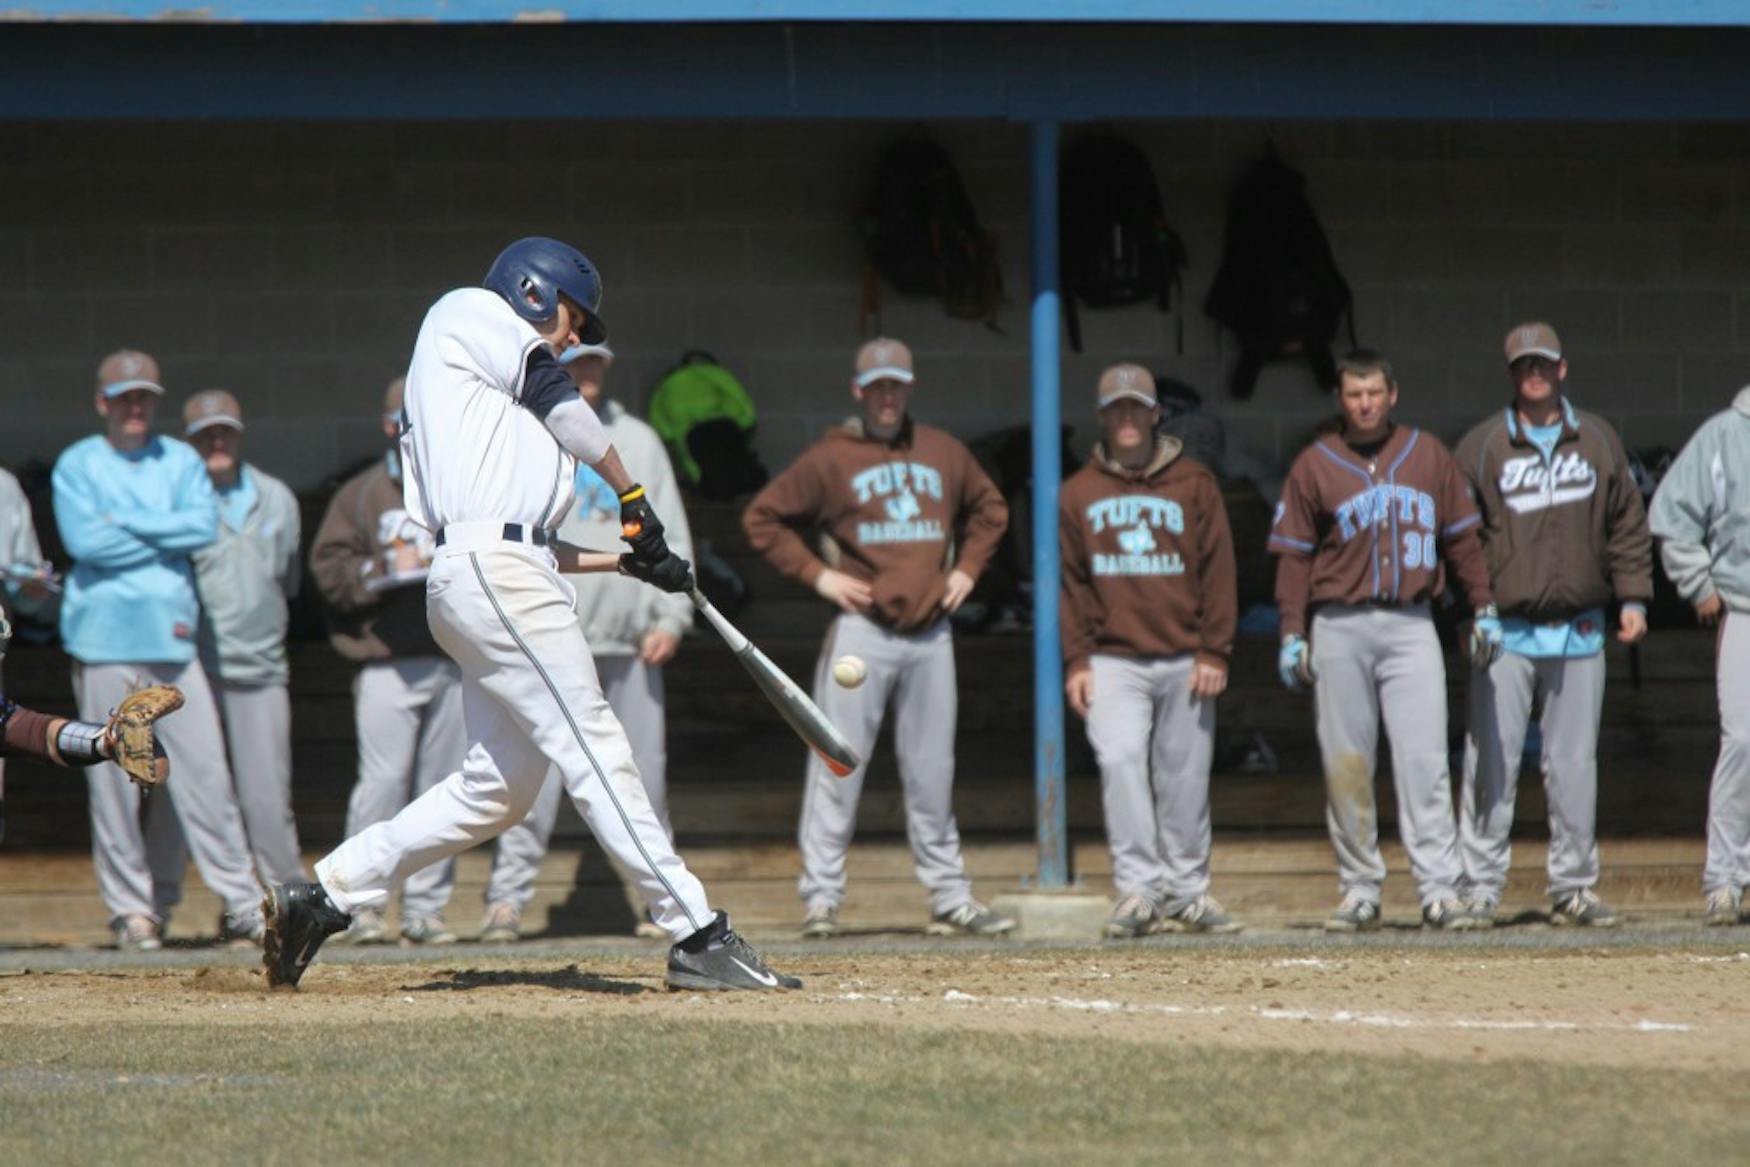 LEFTY HACK: Outfielder Ryan Tettemer ’18 makes contact with the ball against Tufts University at home on April 4.